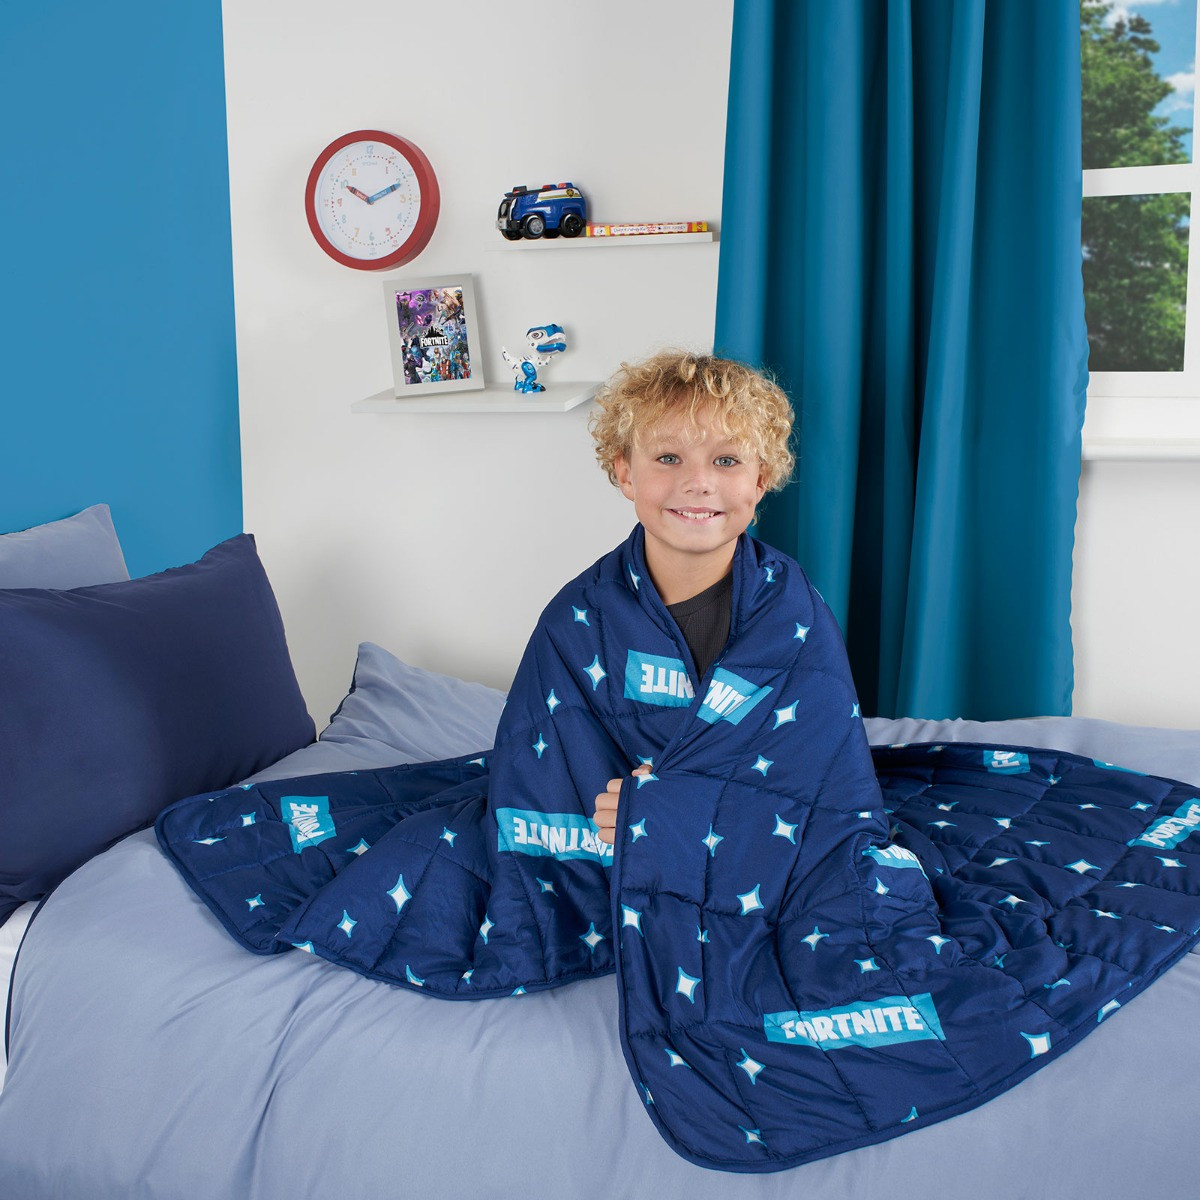 Fortnite Party Weighted Blanket, Navy Blue - 3kg>